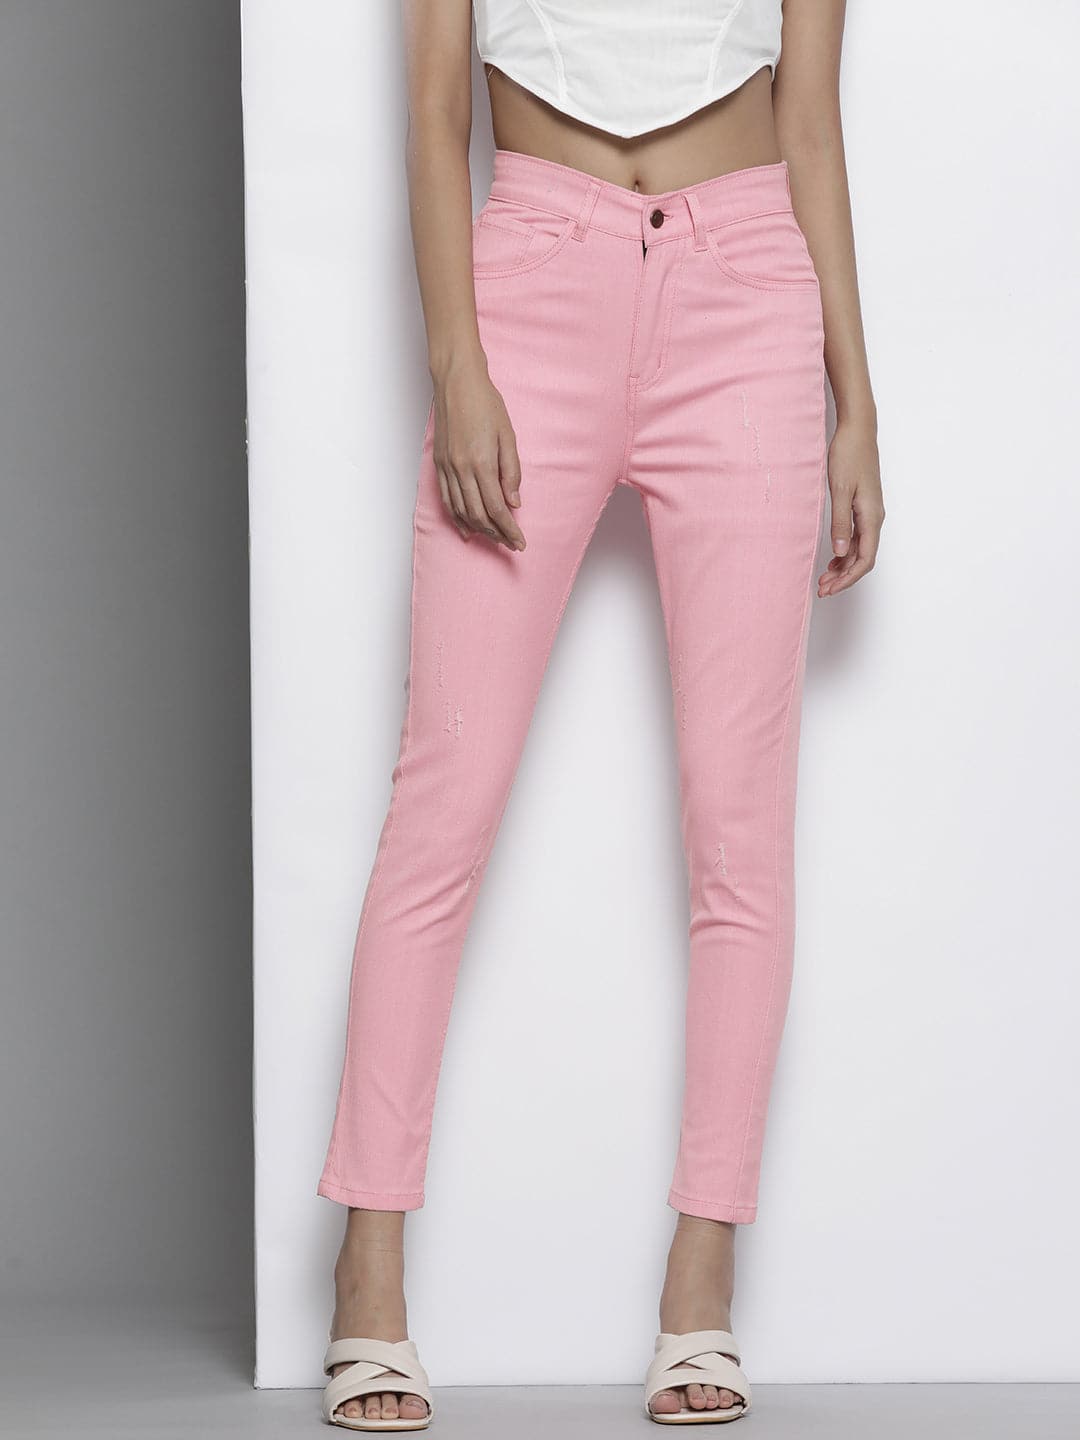 Buy Women Pink Stretchable Twill Skinny Jeans Online at Sassafras